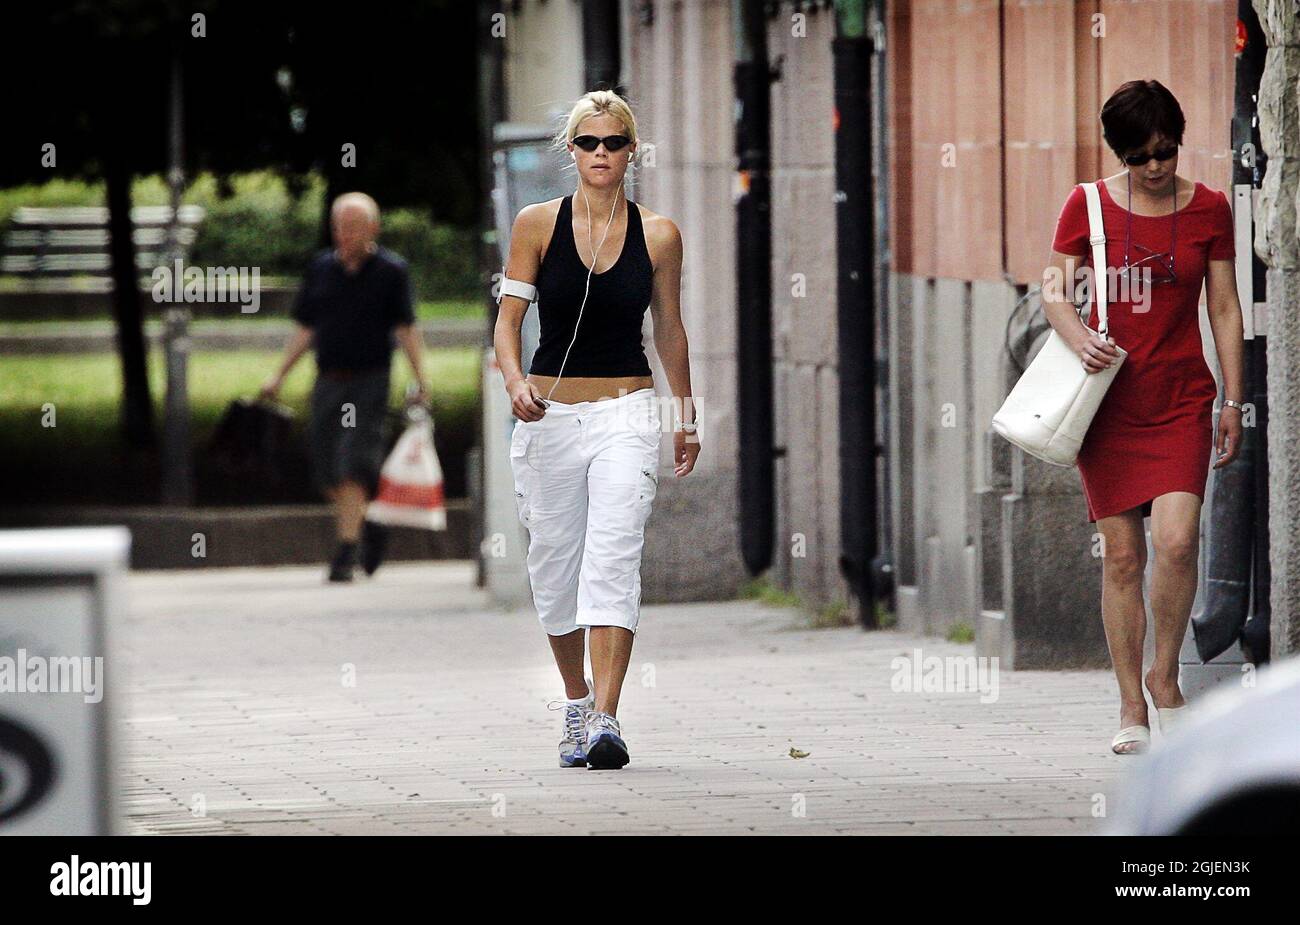 Tiger Woods' wife Elin Nordengren is seen jogging in the Djurgarden park in Stockholm, Sweden, on July 3, 2006. Elin has reportedly moved out of the Woods' family home following allegations of the golfer's multiple affairs. Stock Photo